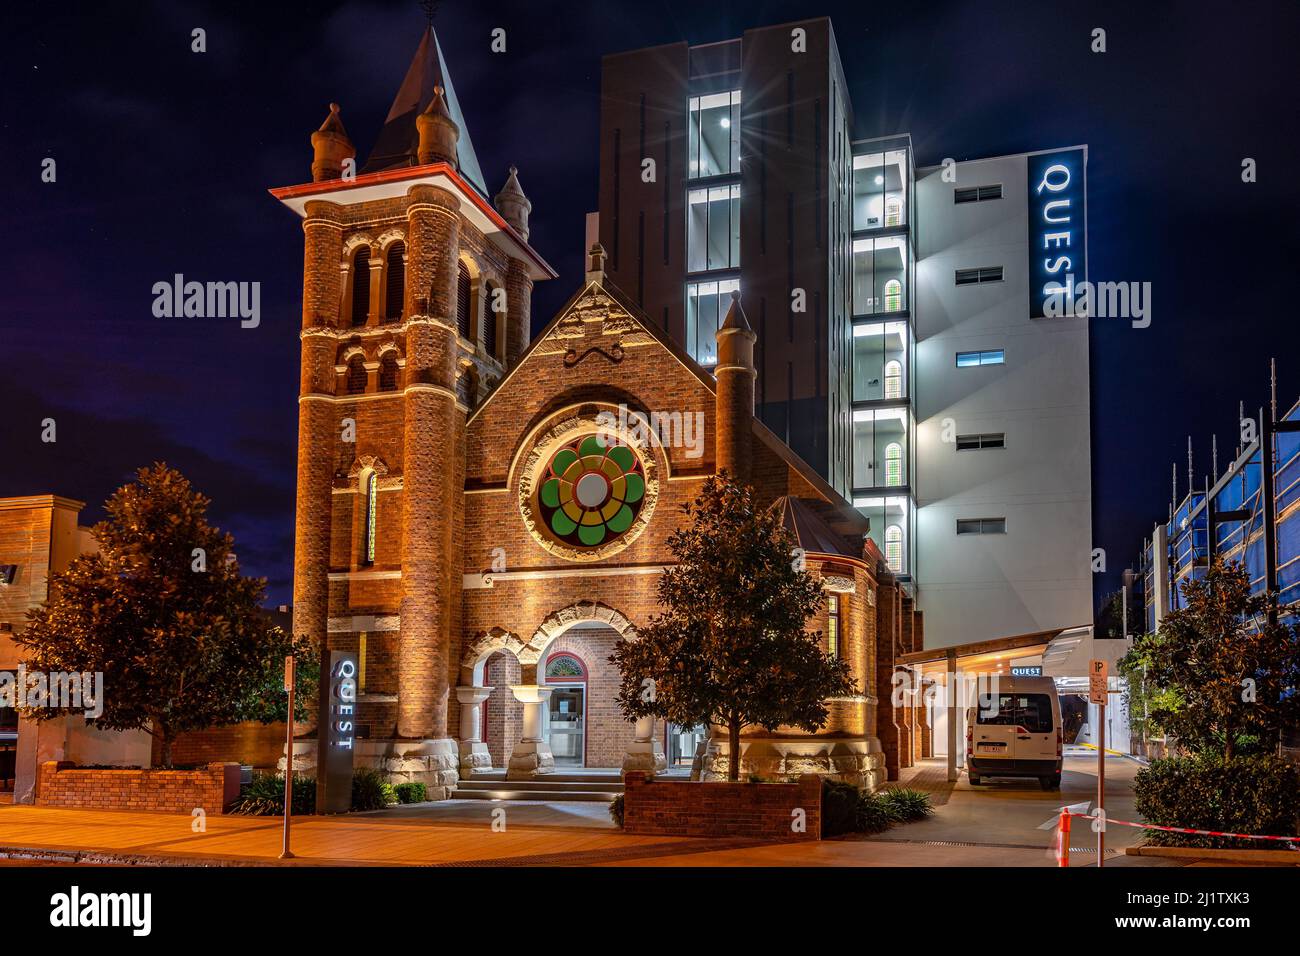 Toowoomba, Queensland, Australia - Quest hotel built above the converted church building at night Stock Photo